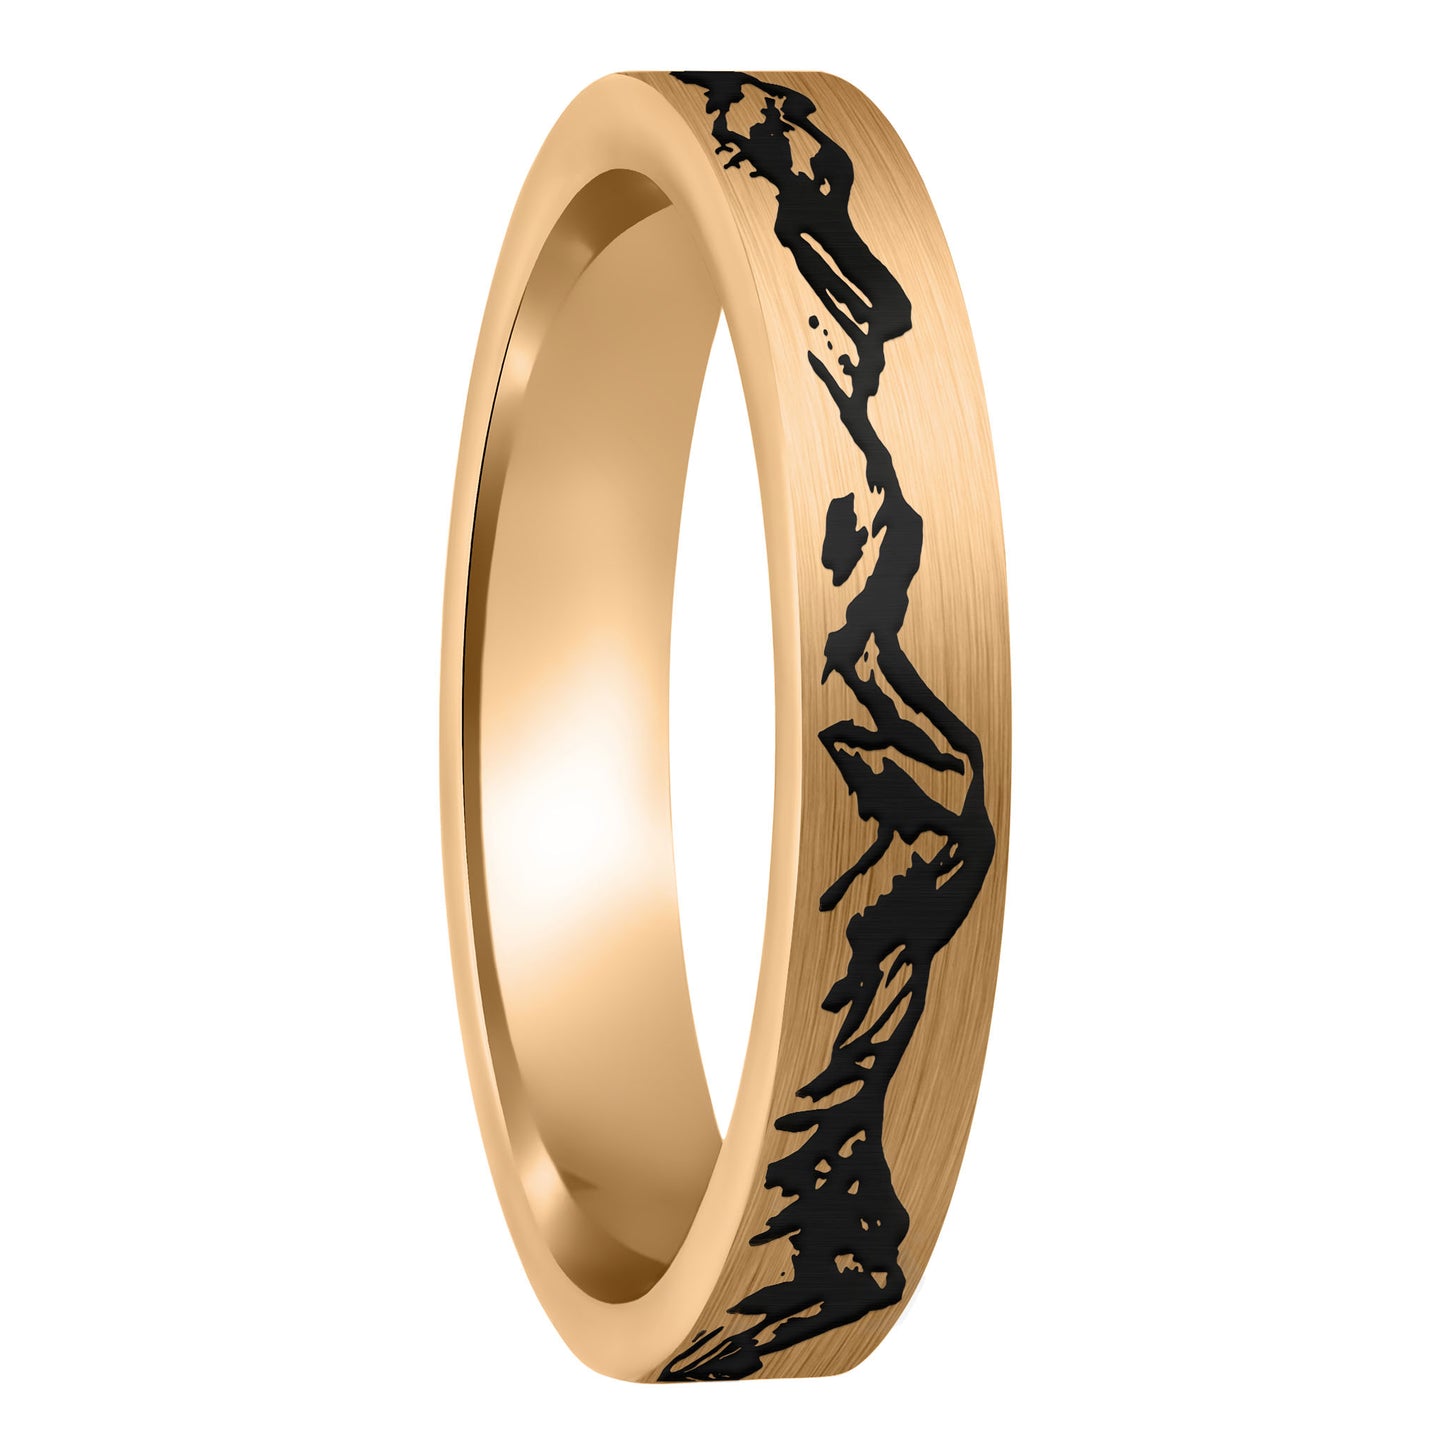 A mountain range brushed rose gold tungsten women's wedding band displayed on a plain white background.